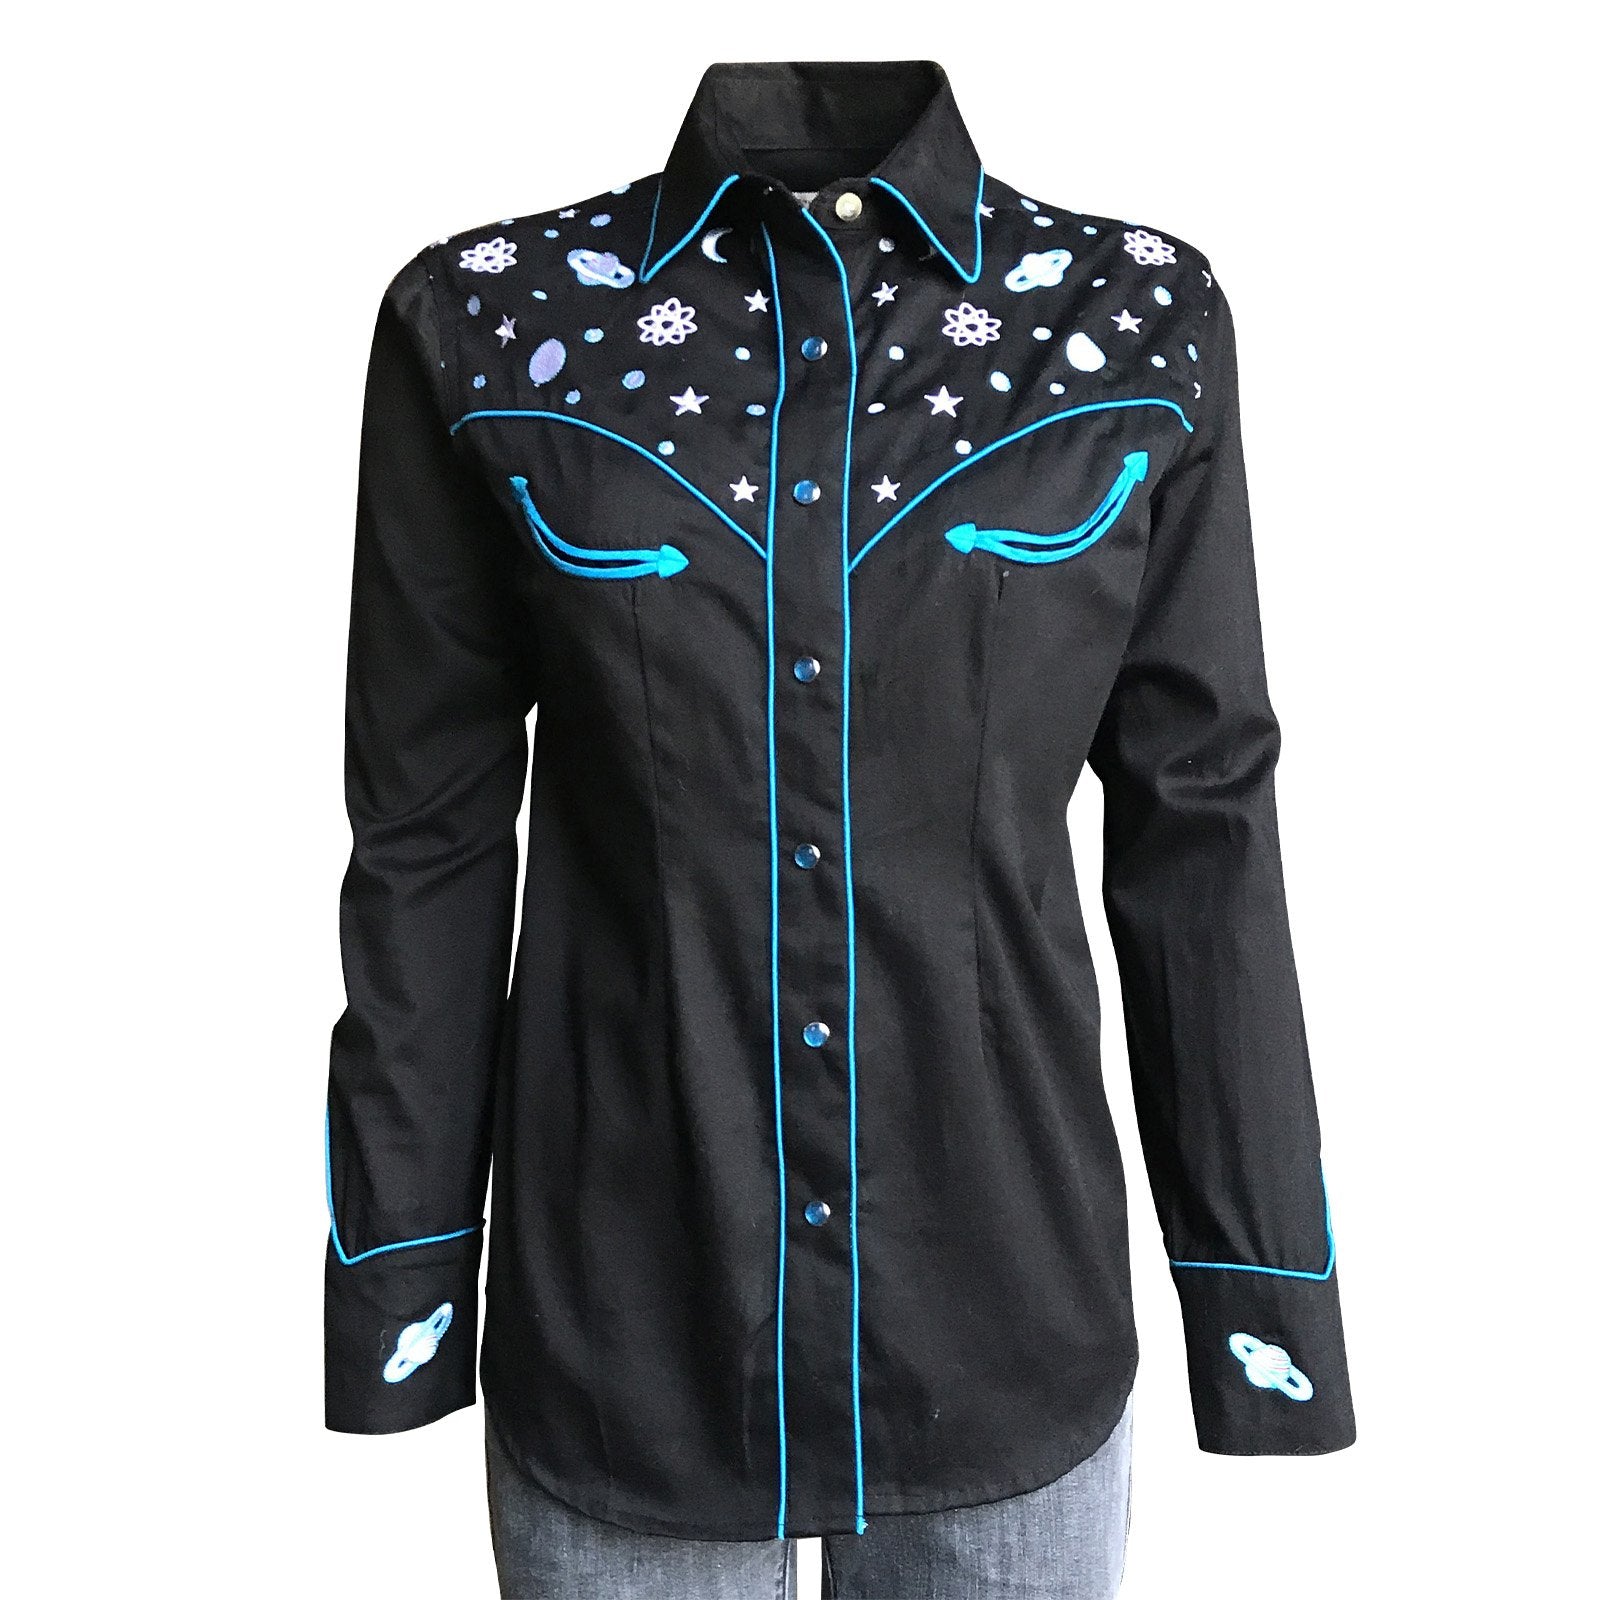 Rockmount Ranch Wear Ladies' Vintage Inspired Western Shirt with Embroidered Planets Front